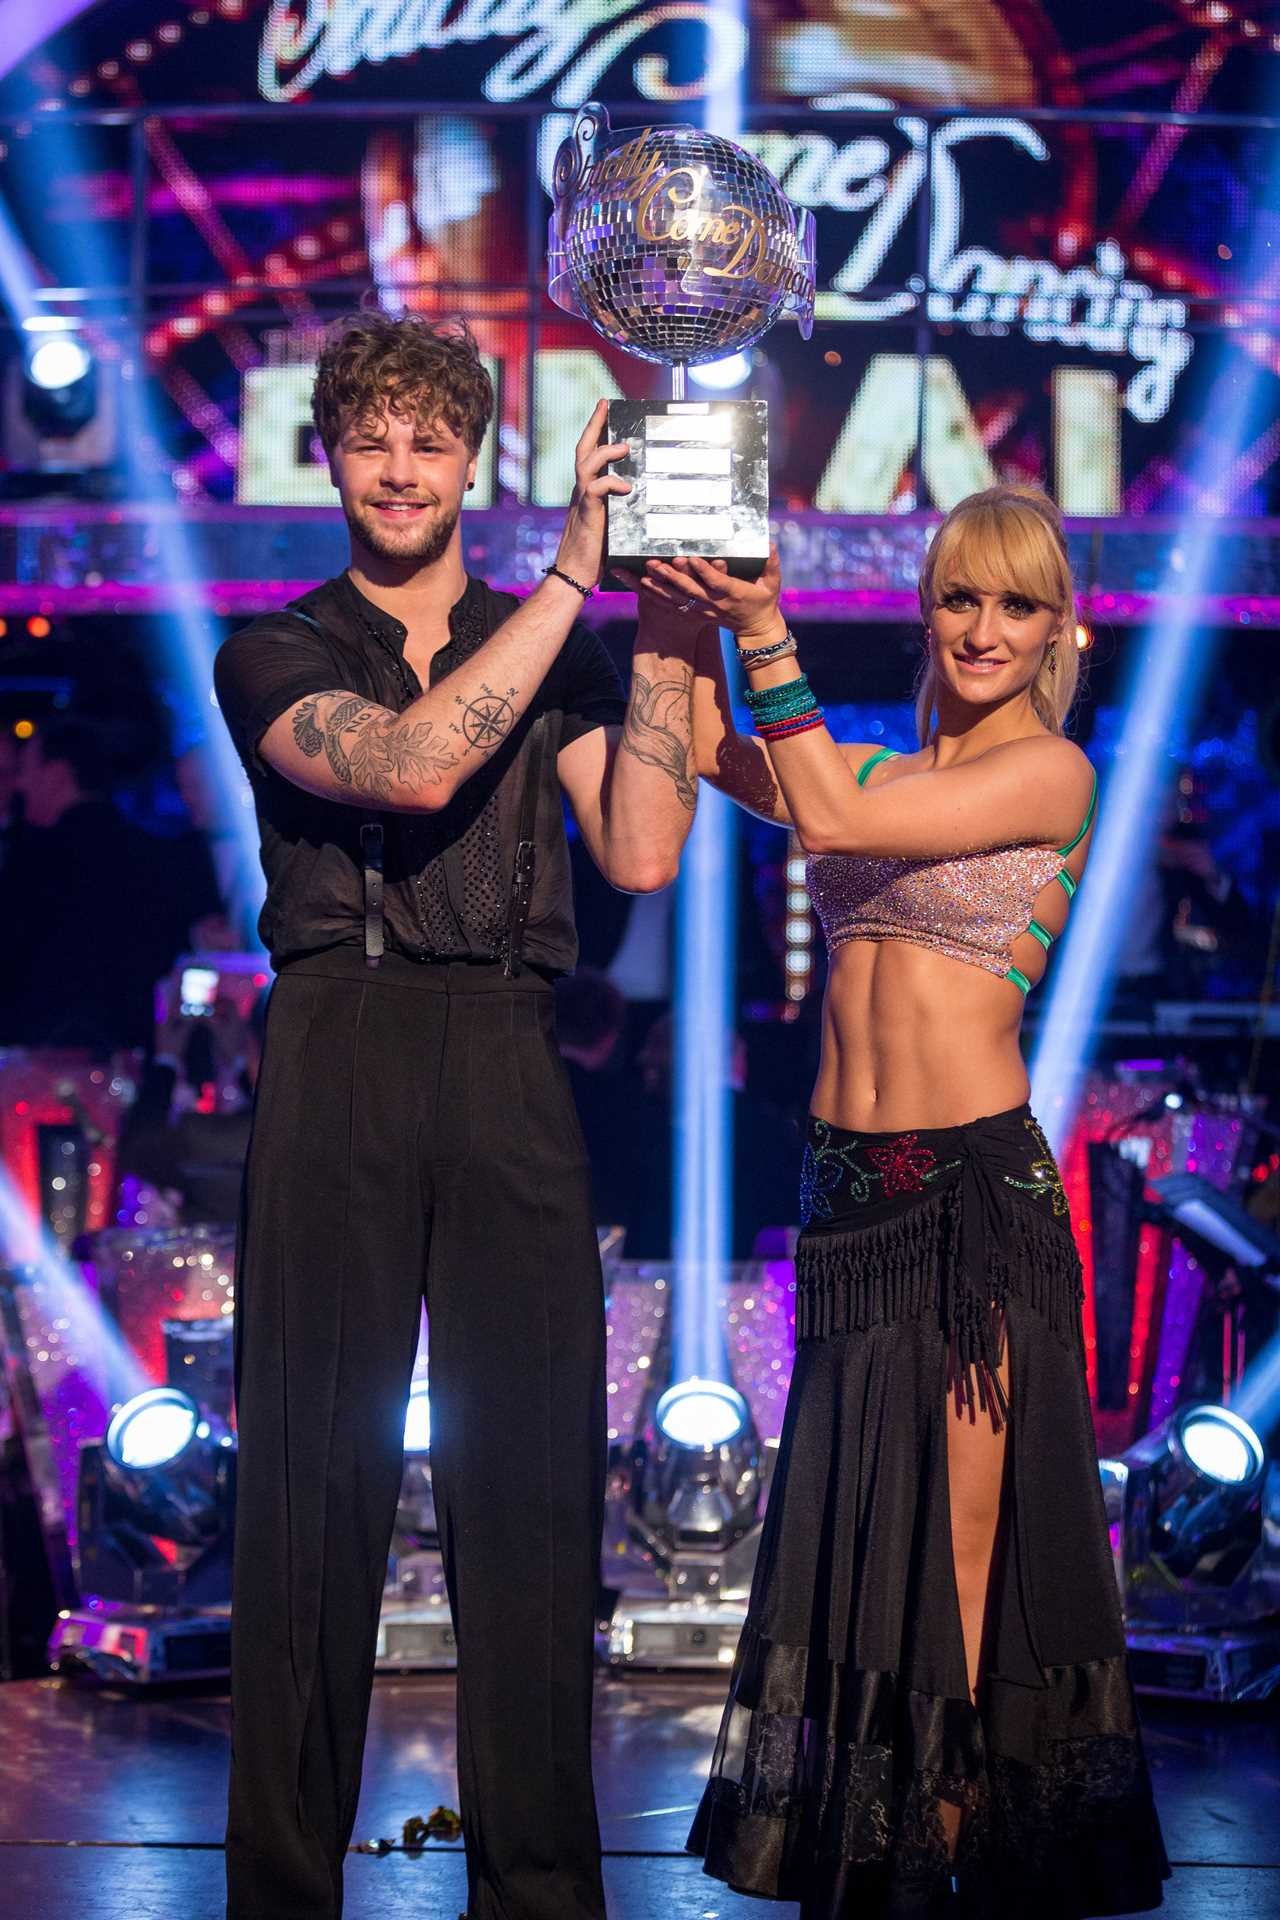 How Strictly winners have cashed in with lingerie deals, Britain’s Got Talent job and bizarre new career